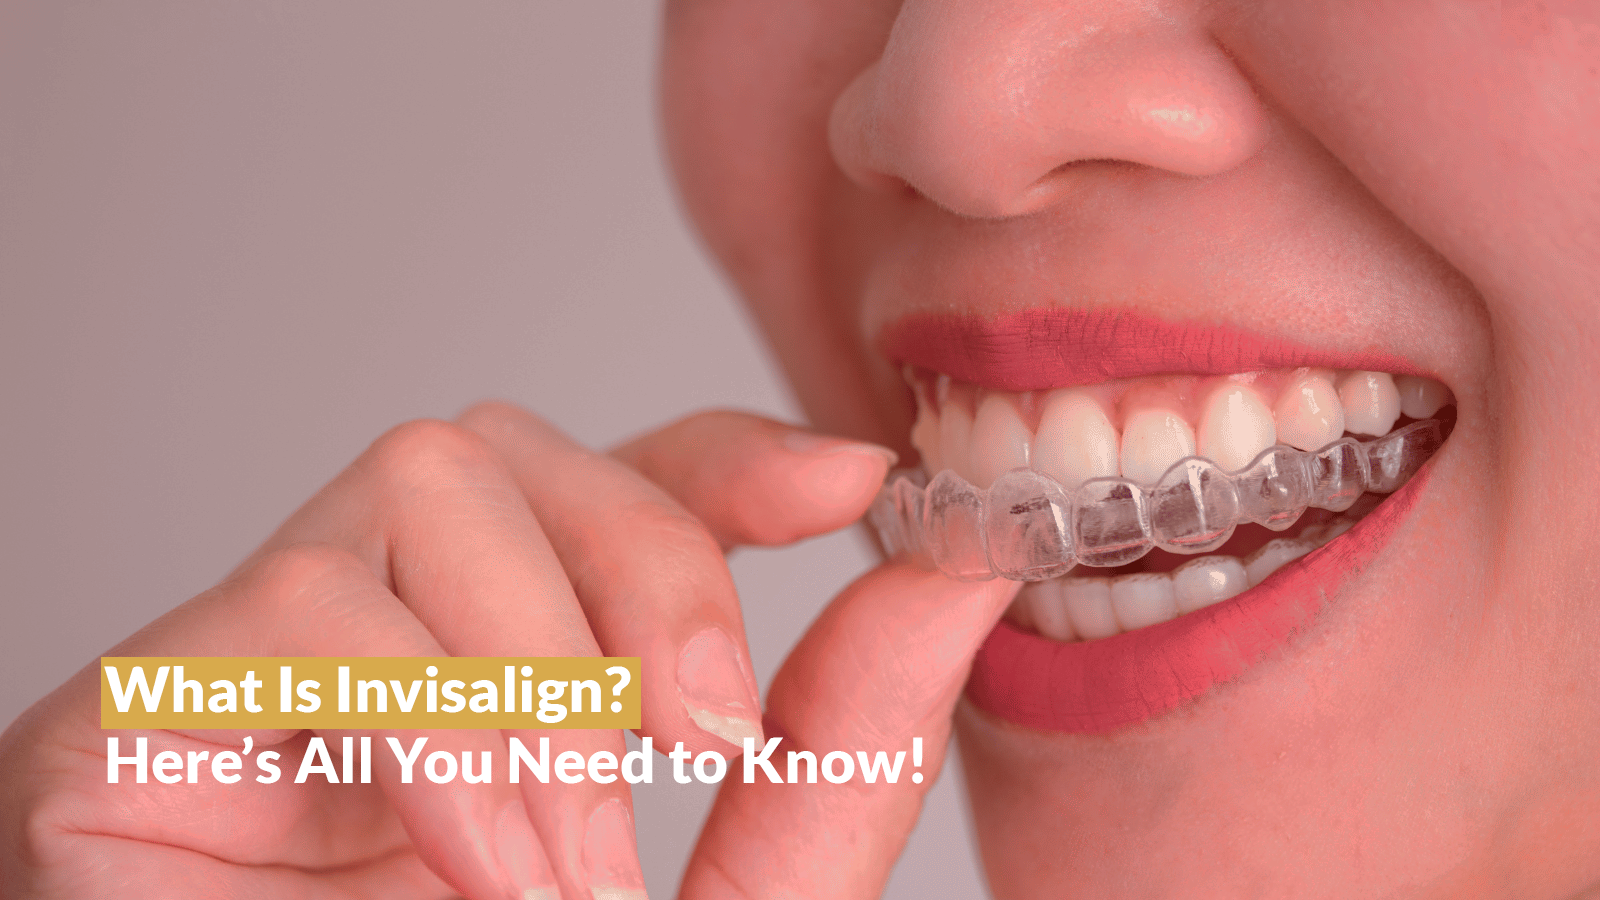 What Is Invisalign? Here’s All You Need to Know!